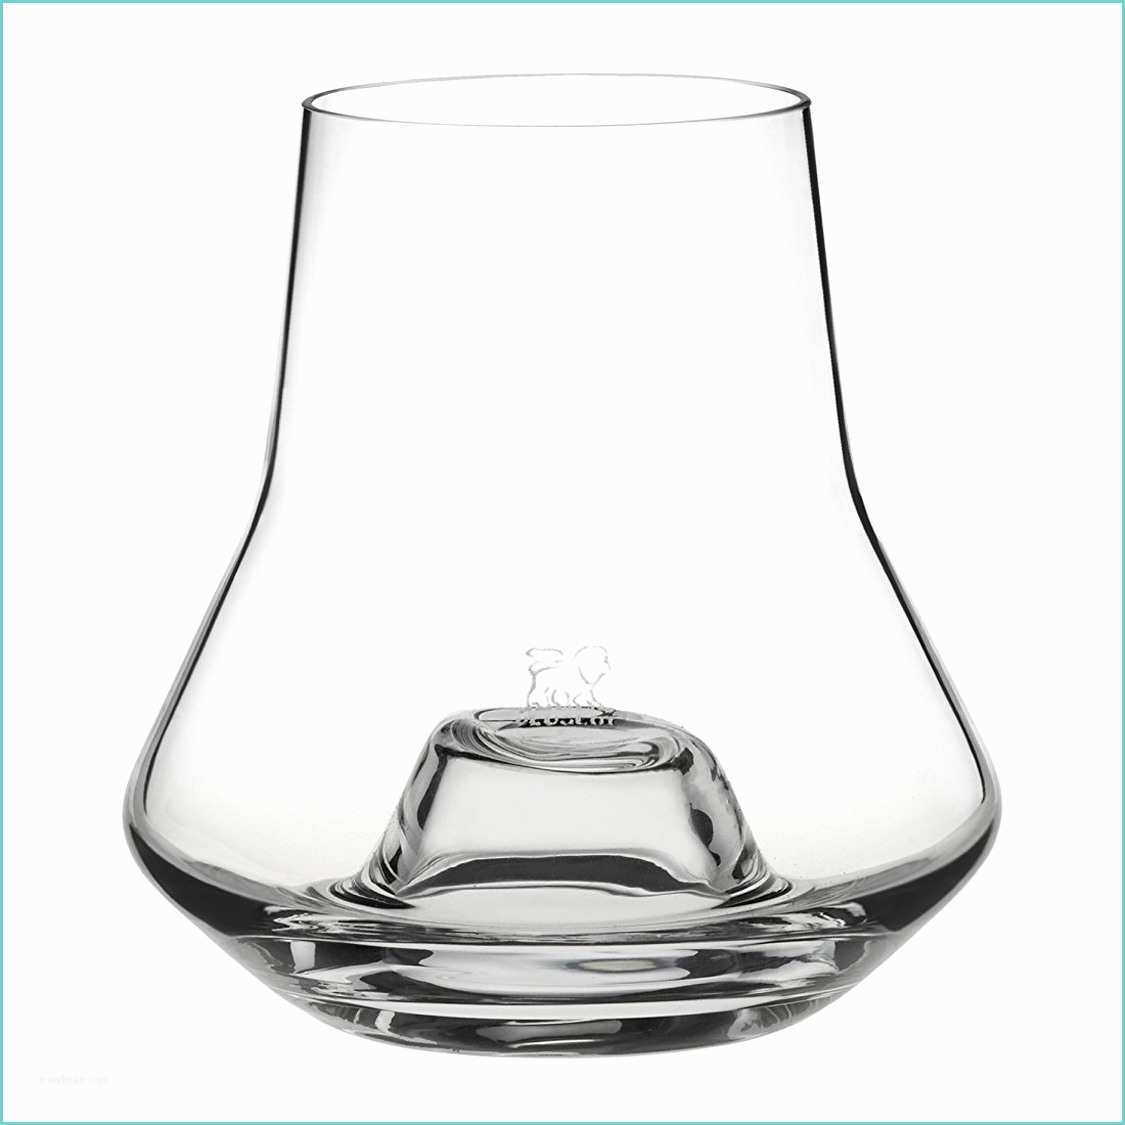 Verre Whisky Peugeot Peugeot Whisky Tasting Glass with Chilling Base the